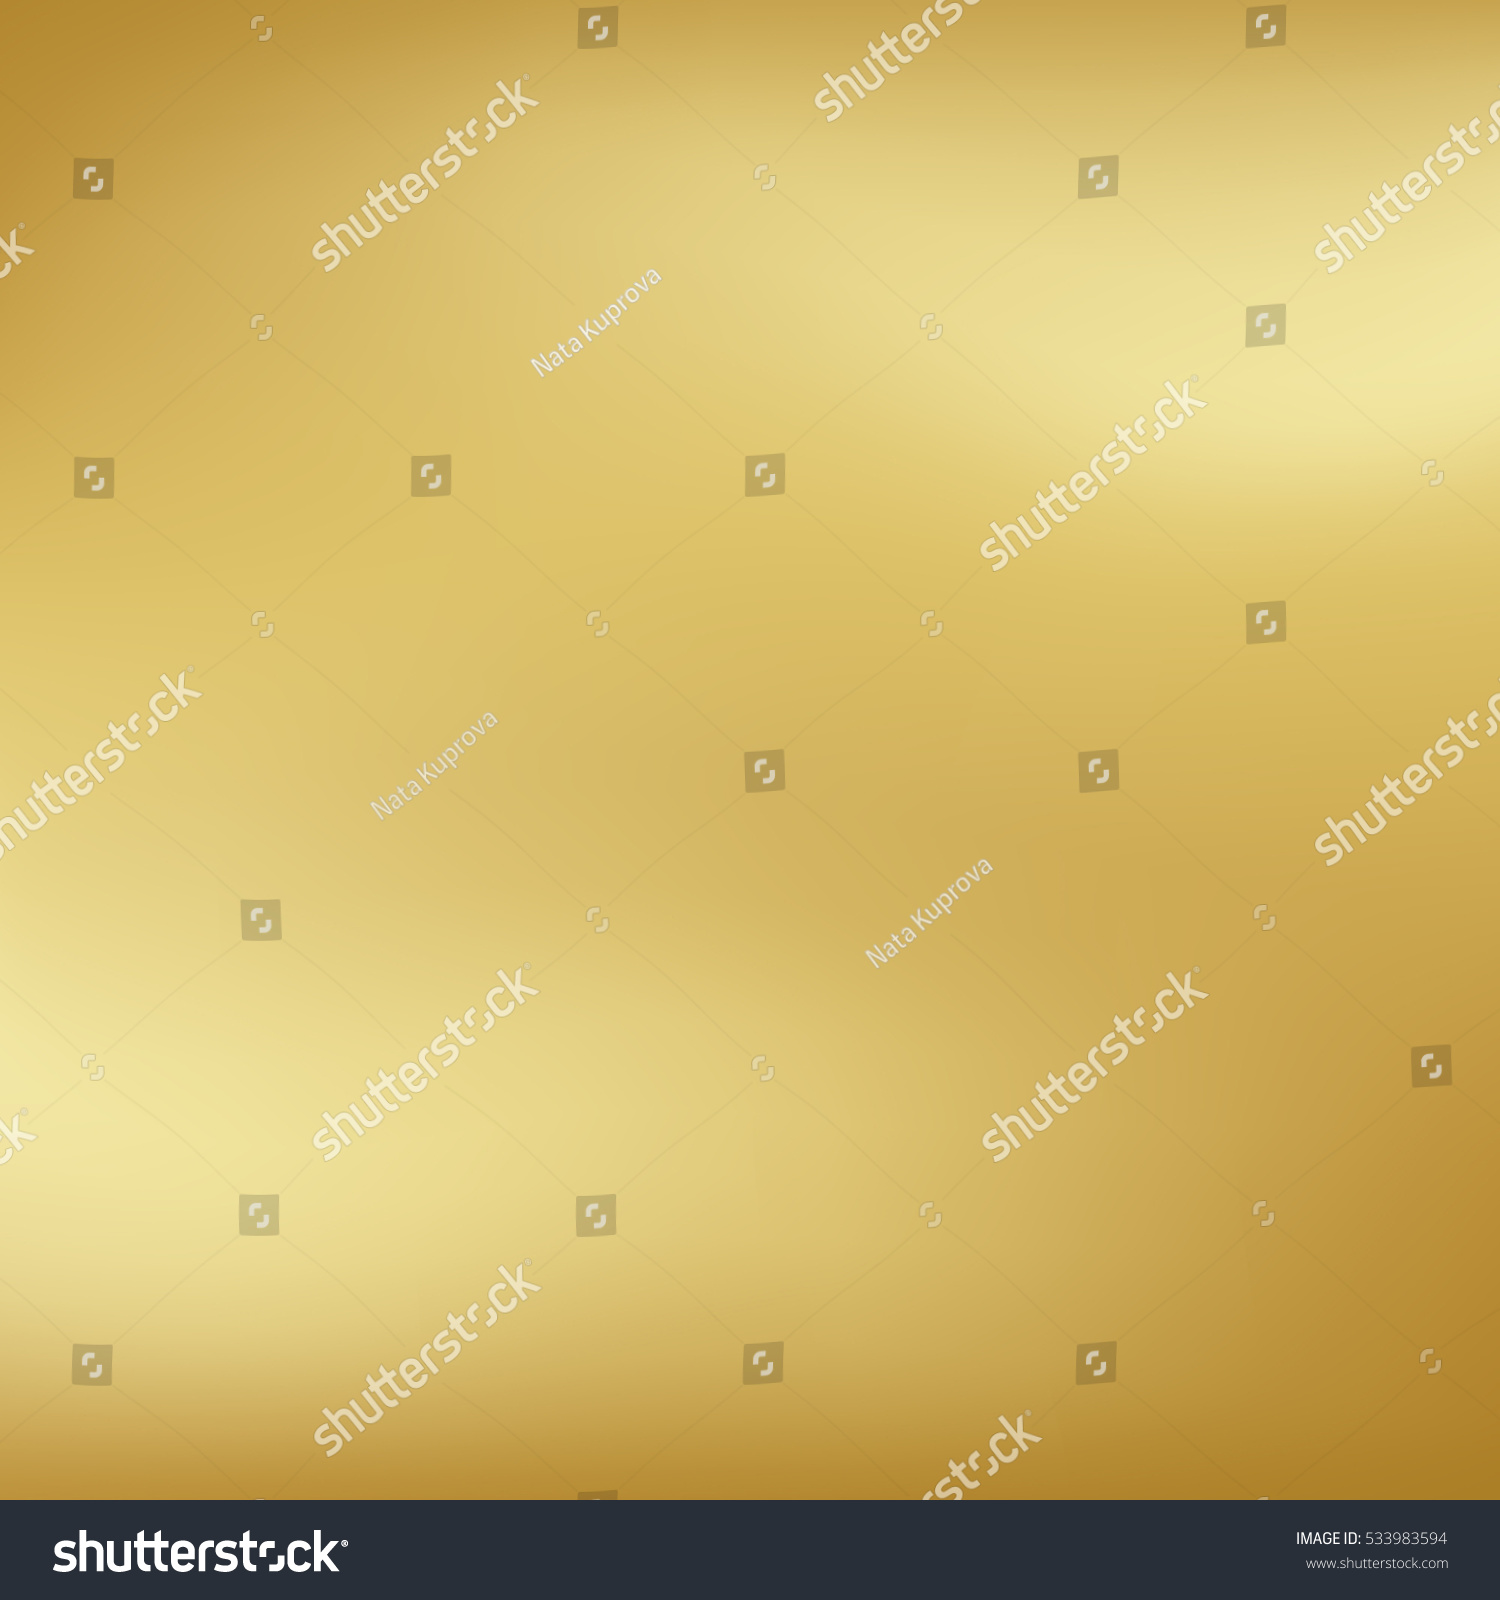 Vector gold blurred gradient style background. Abstract smooth colorful illustration, social media wallpaper. #533983594